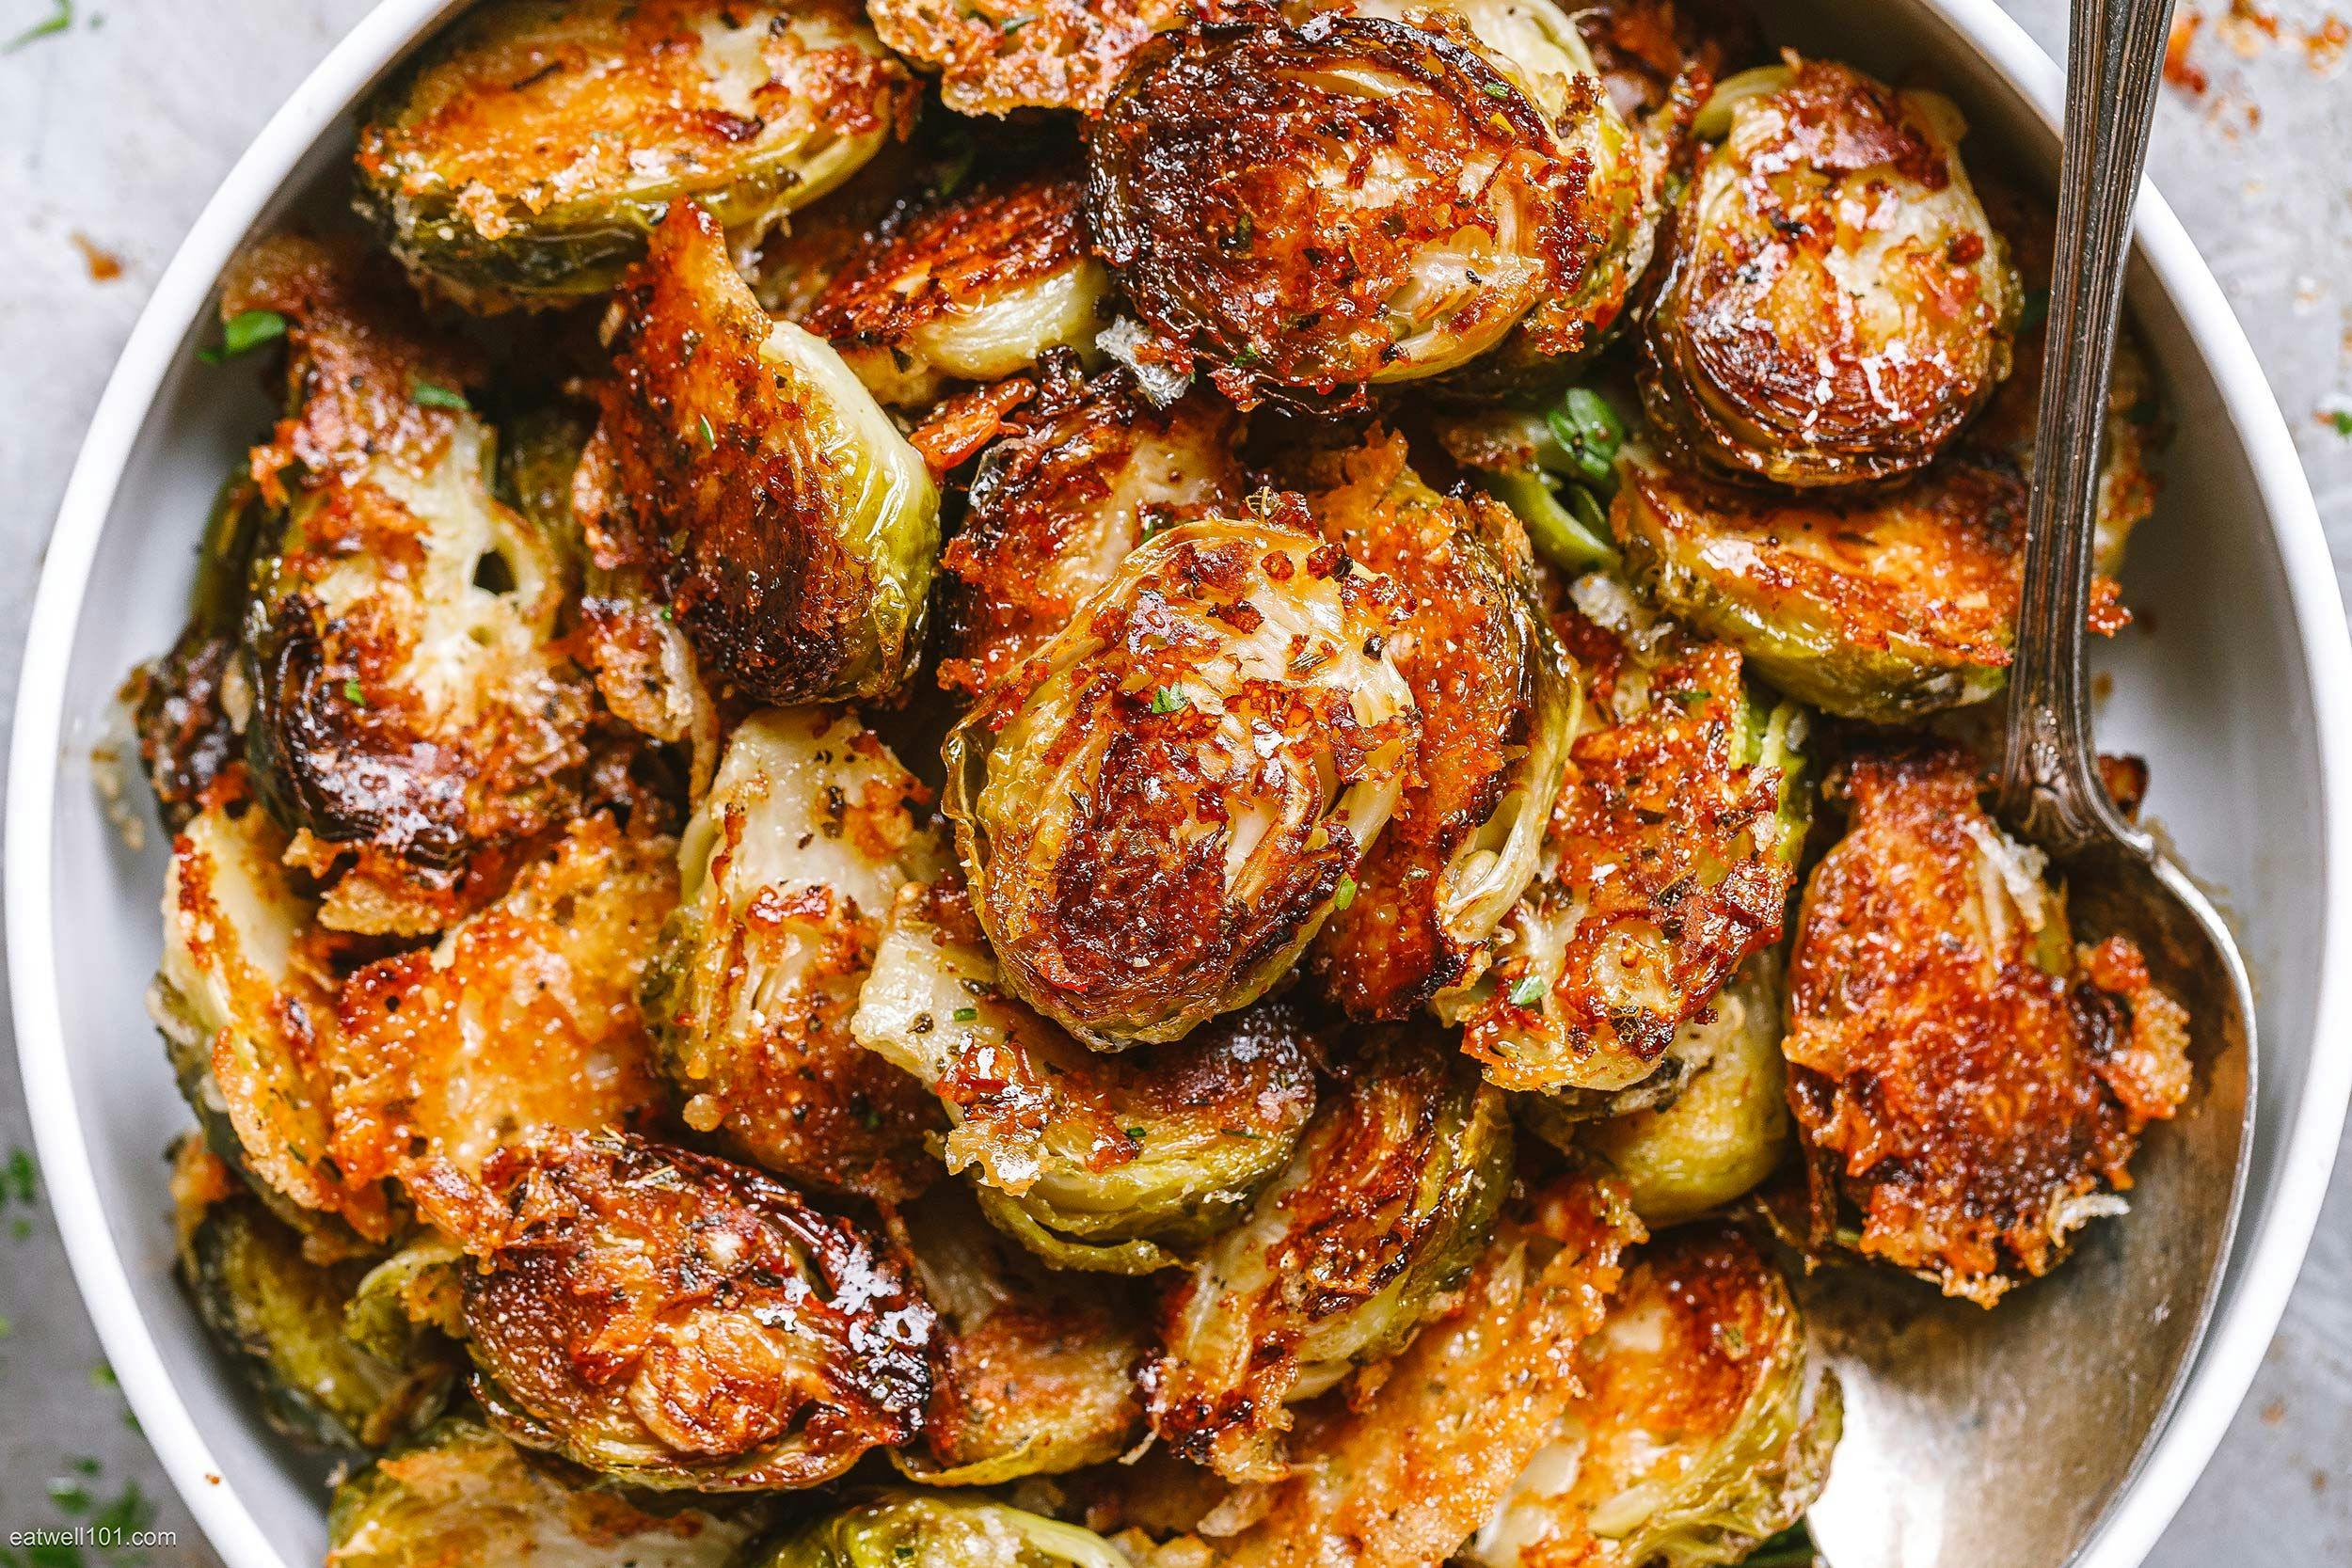 Parmesan Crusted Brussel Sprouts